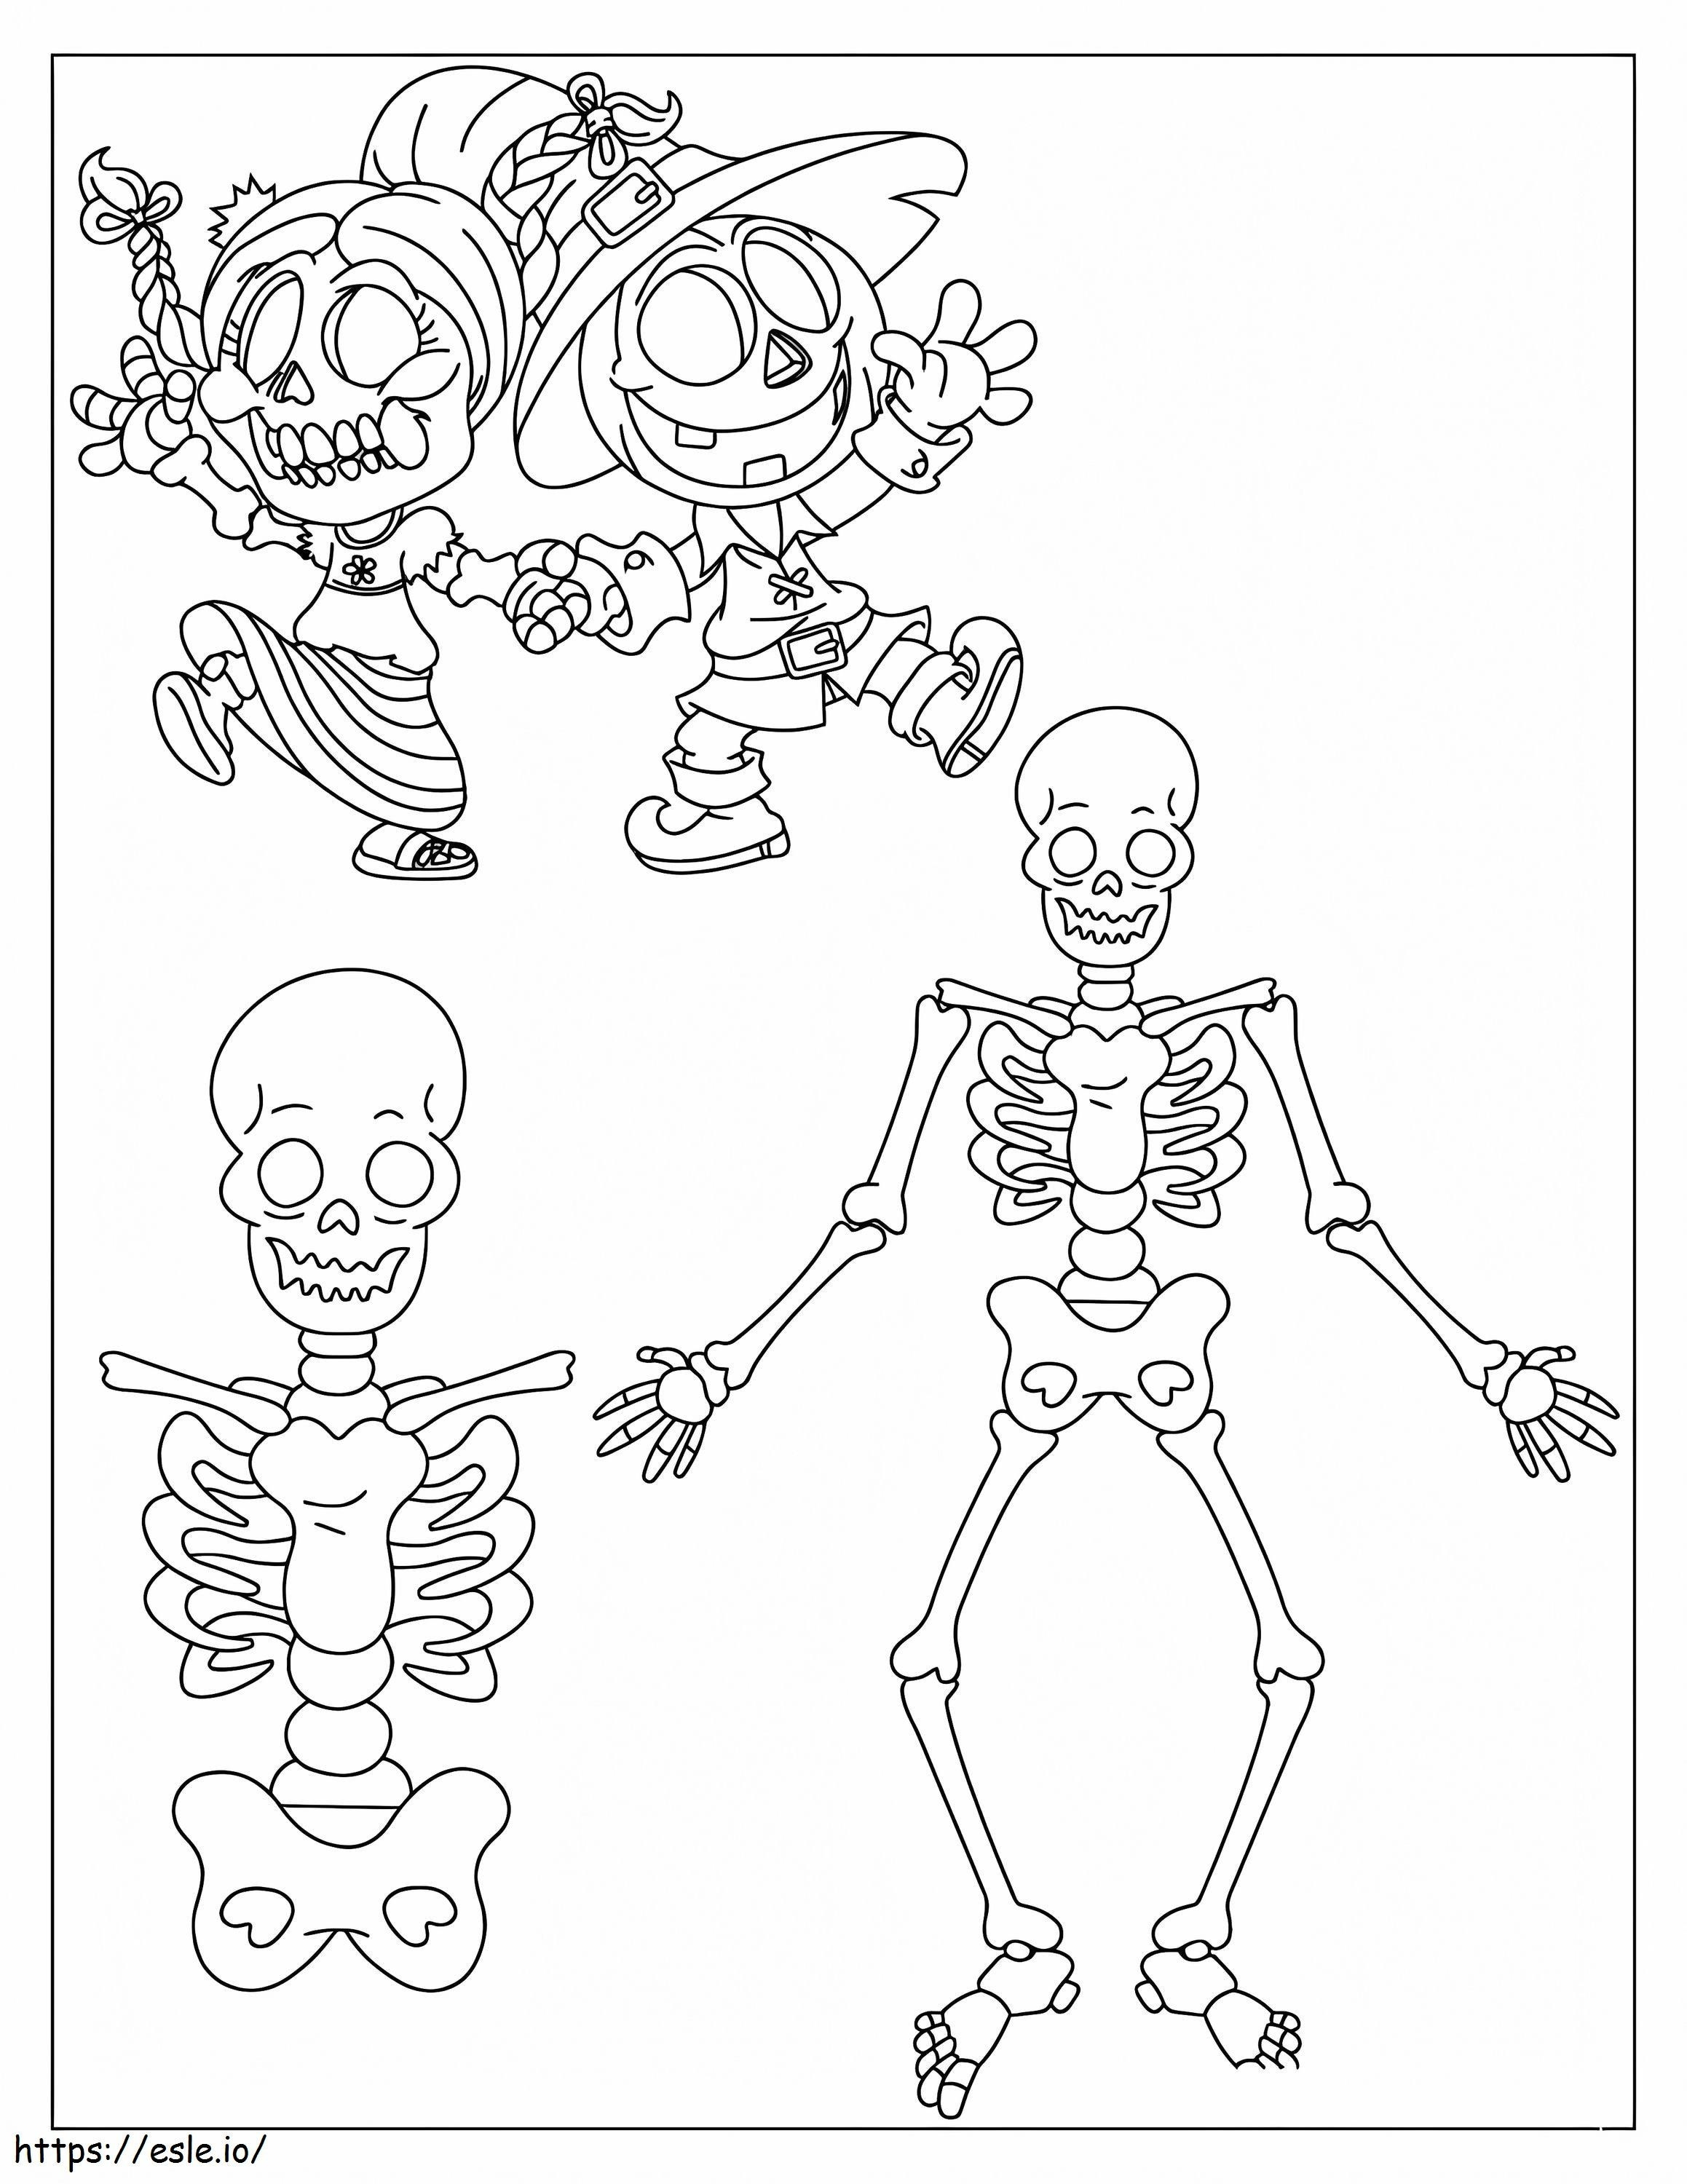 Family Skeleton coloring page